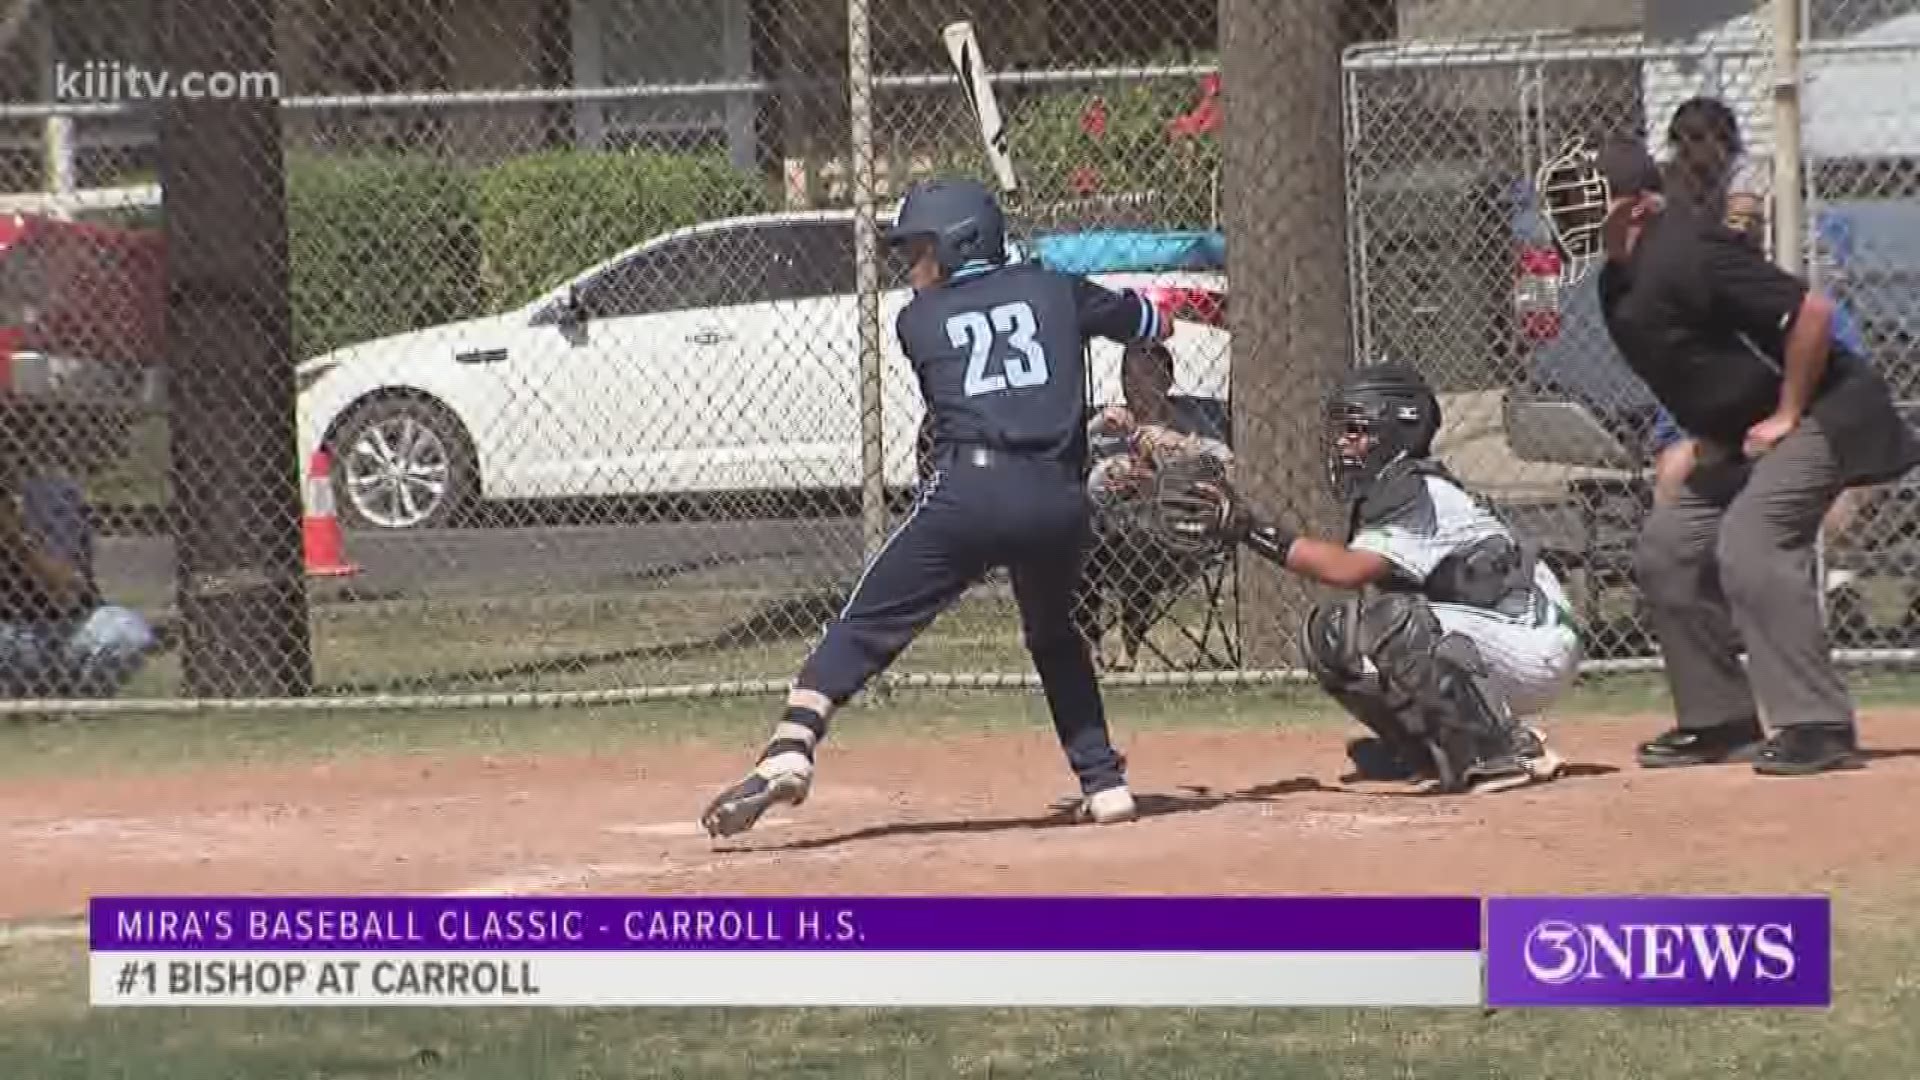 Highlights of four high school baseball games from day one of the Mira's Classic and Calallen Classic.